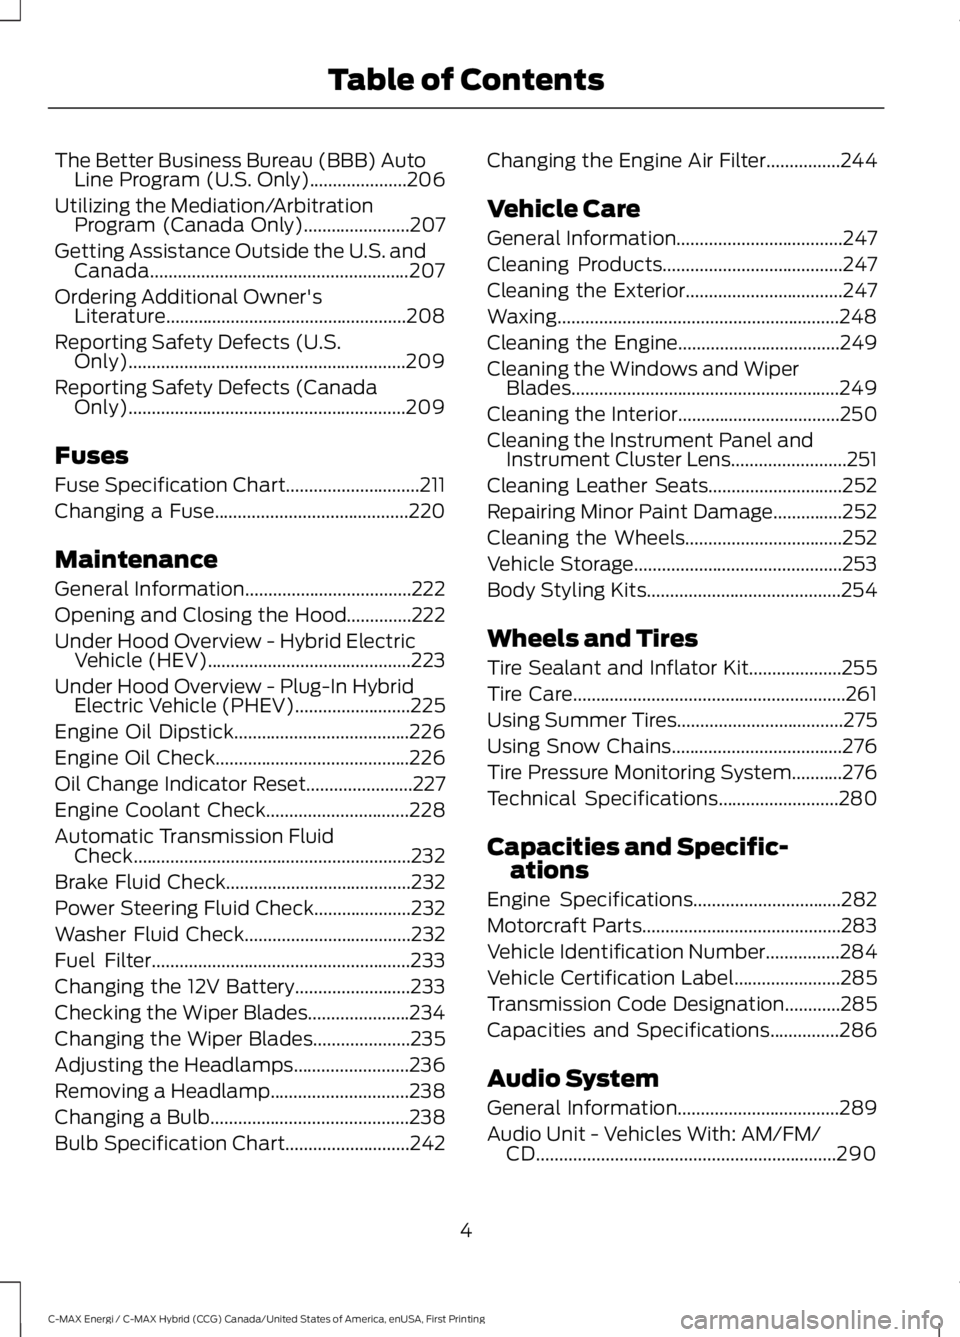 FORD C MAX ENERGI 2017  Owners Manual The Better Business Bureau (BBB) AutoLine Program (U.S. Only).....................206
Utilizing the Mediation/ArbitrationProgram (Canada Only).......................207
Getting Assistance Outside the 